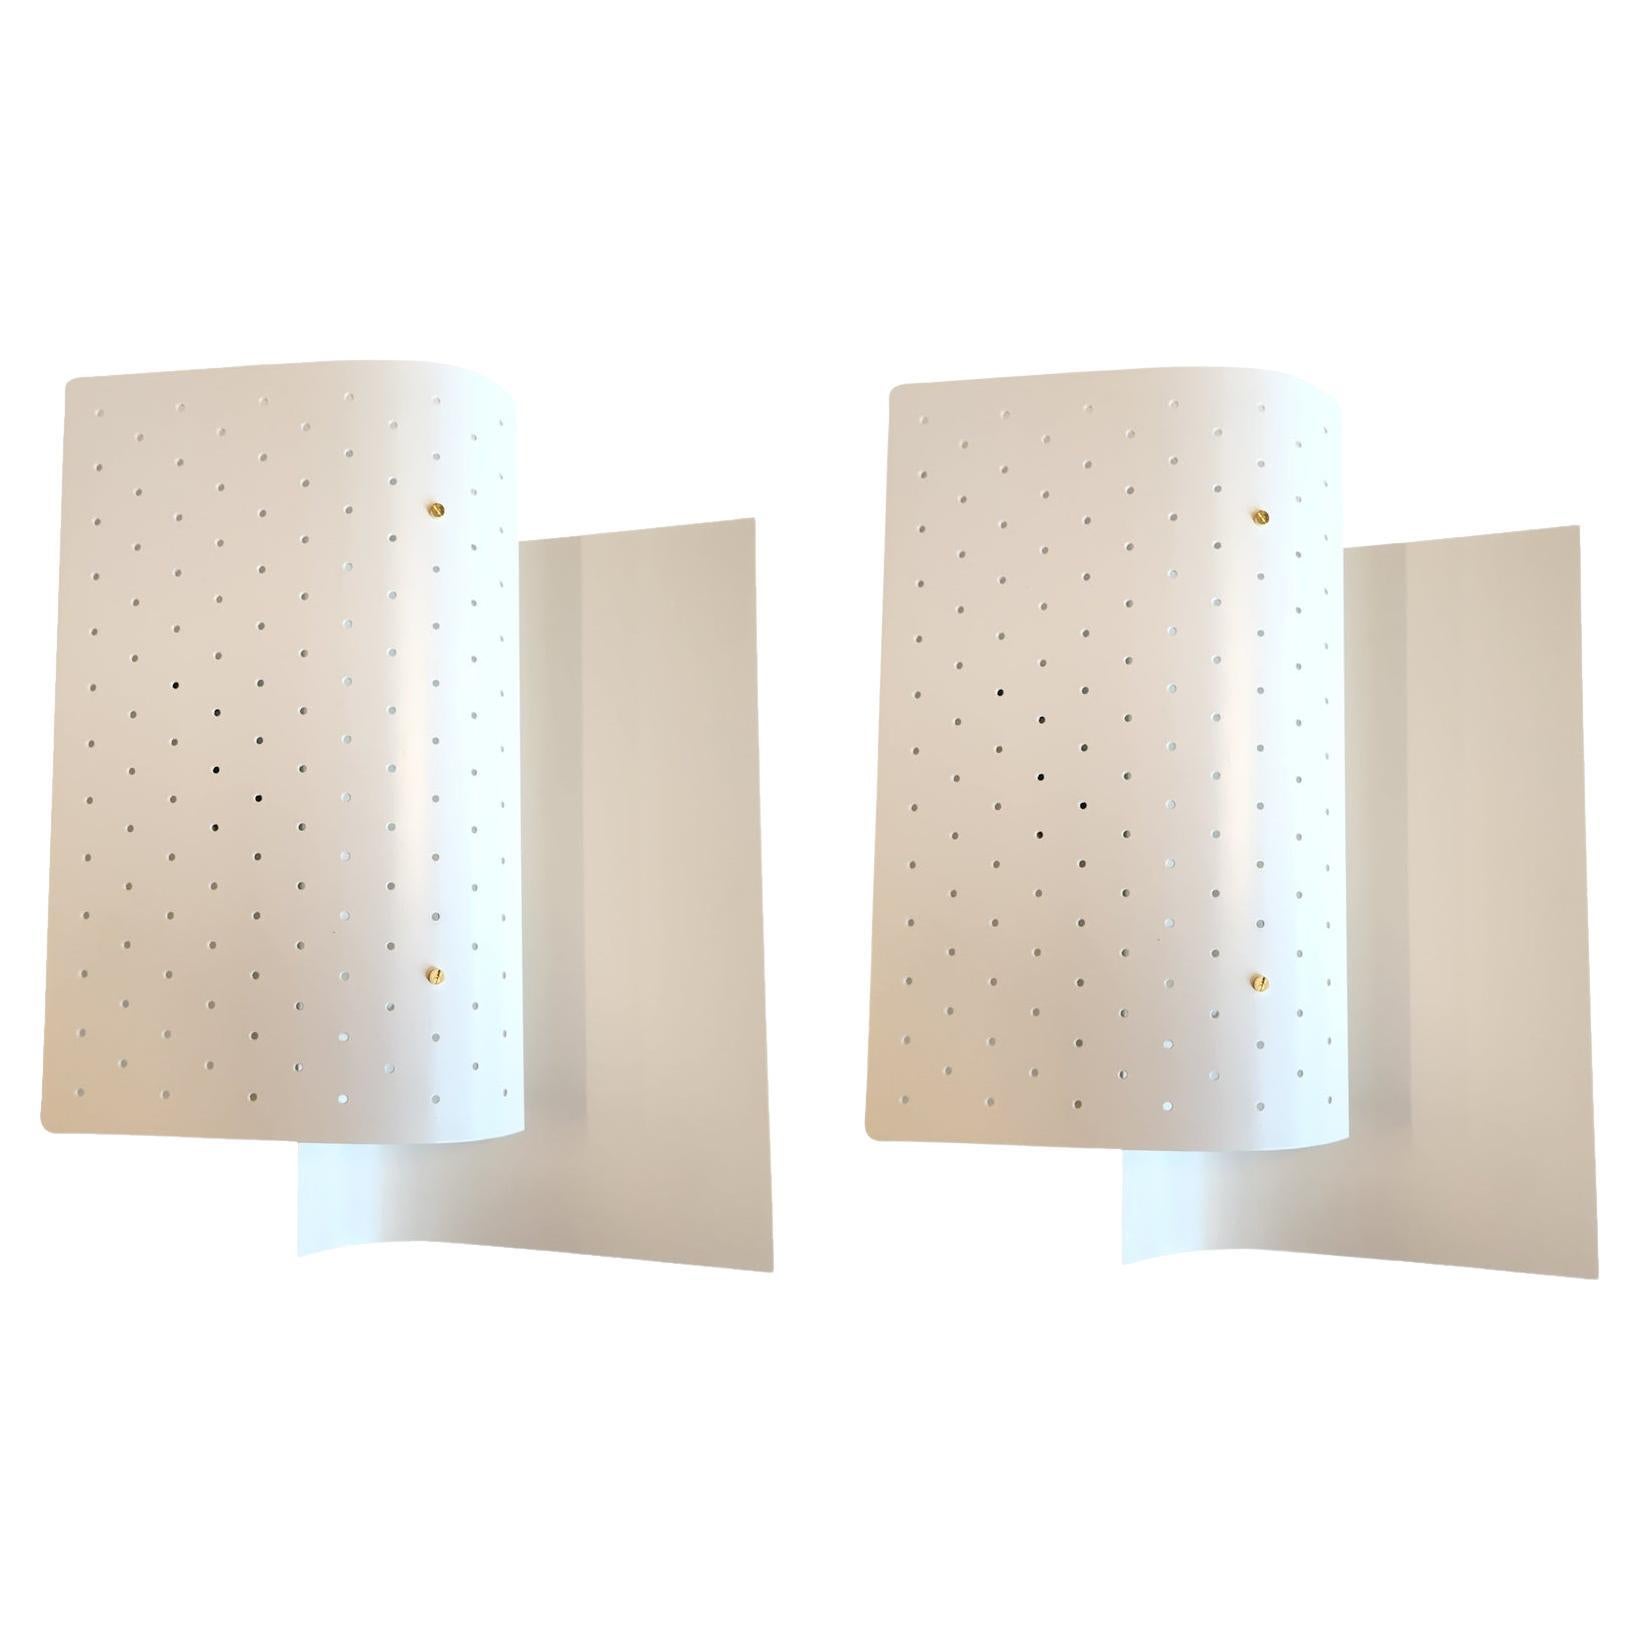 Michel Buffet - Pair of White Sconces B205 - IN STOCK! For Sale